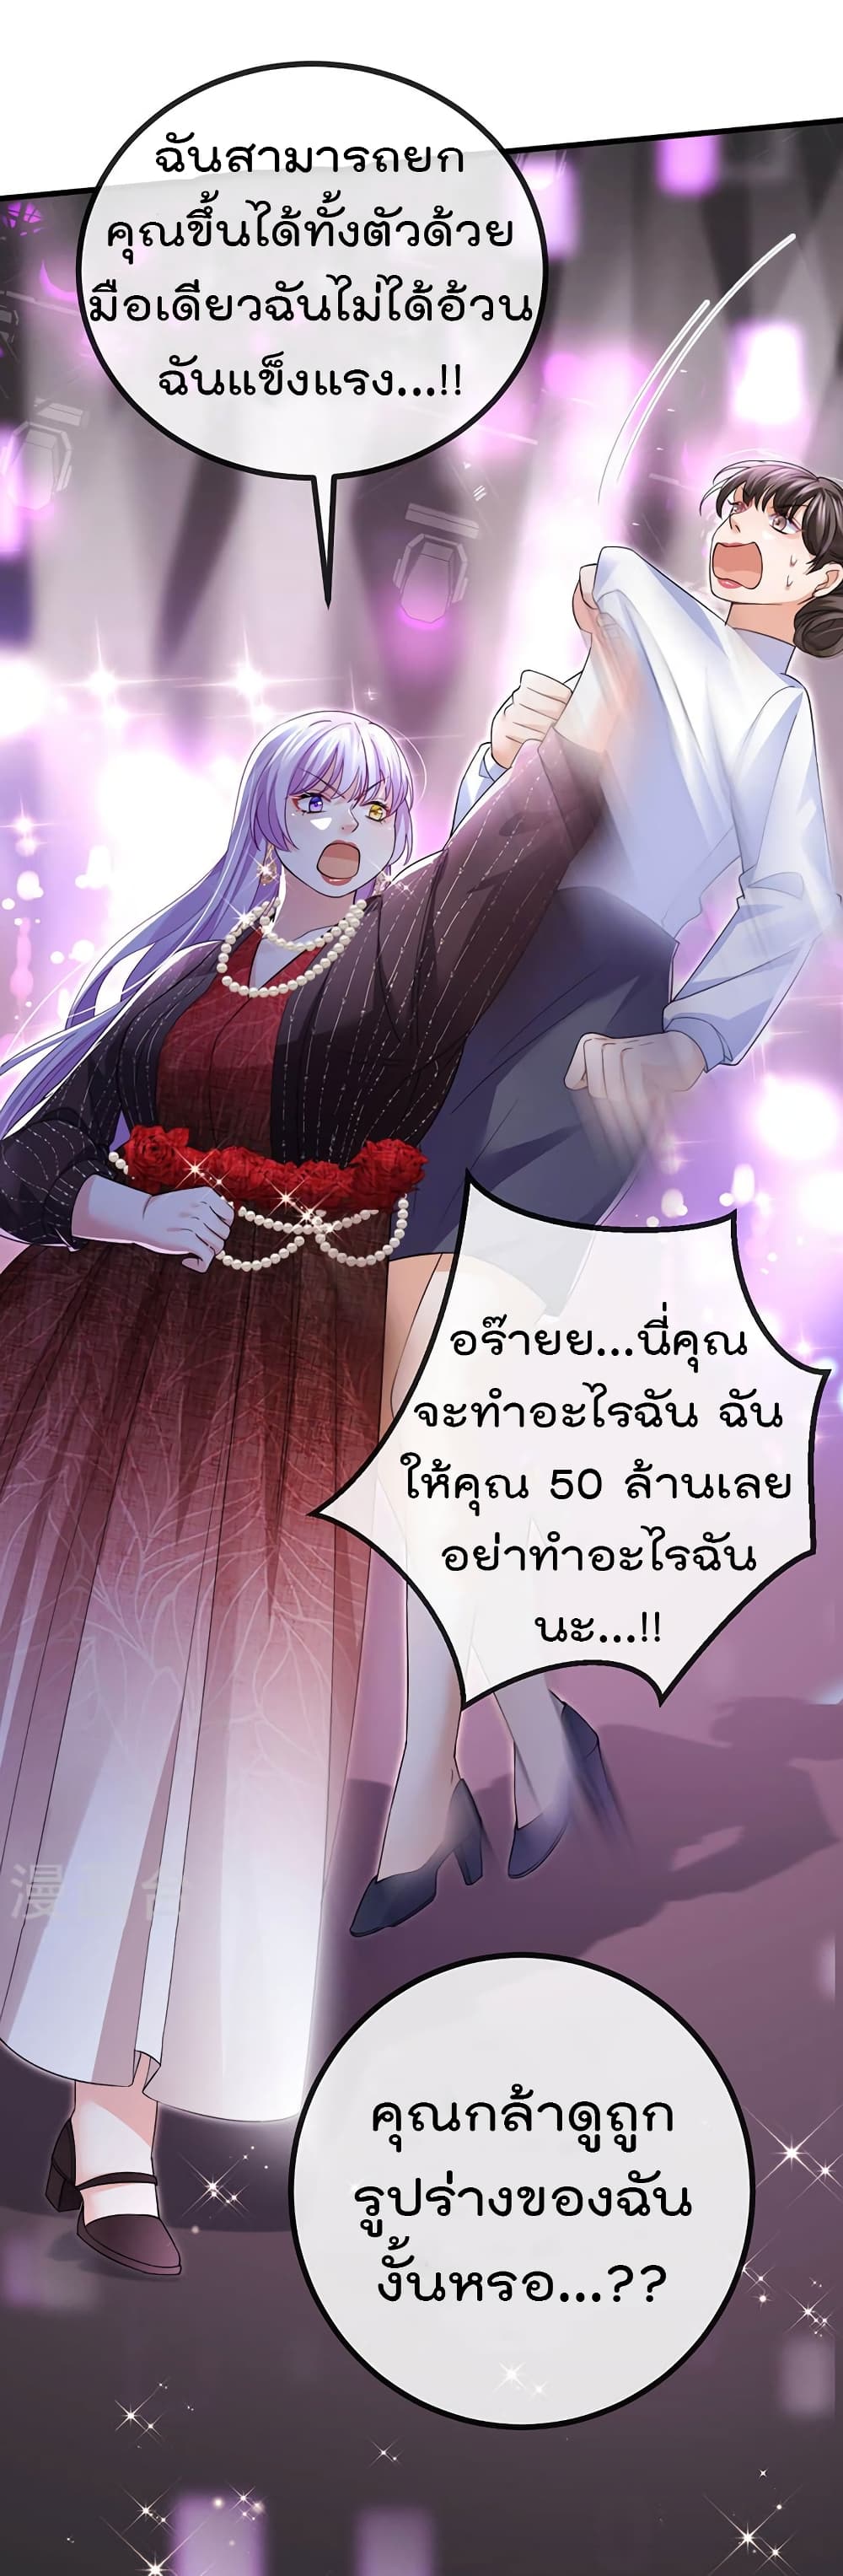 One Hundred Ways to Abuse Scum ตอนที่ 79 (30)